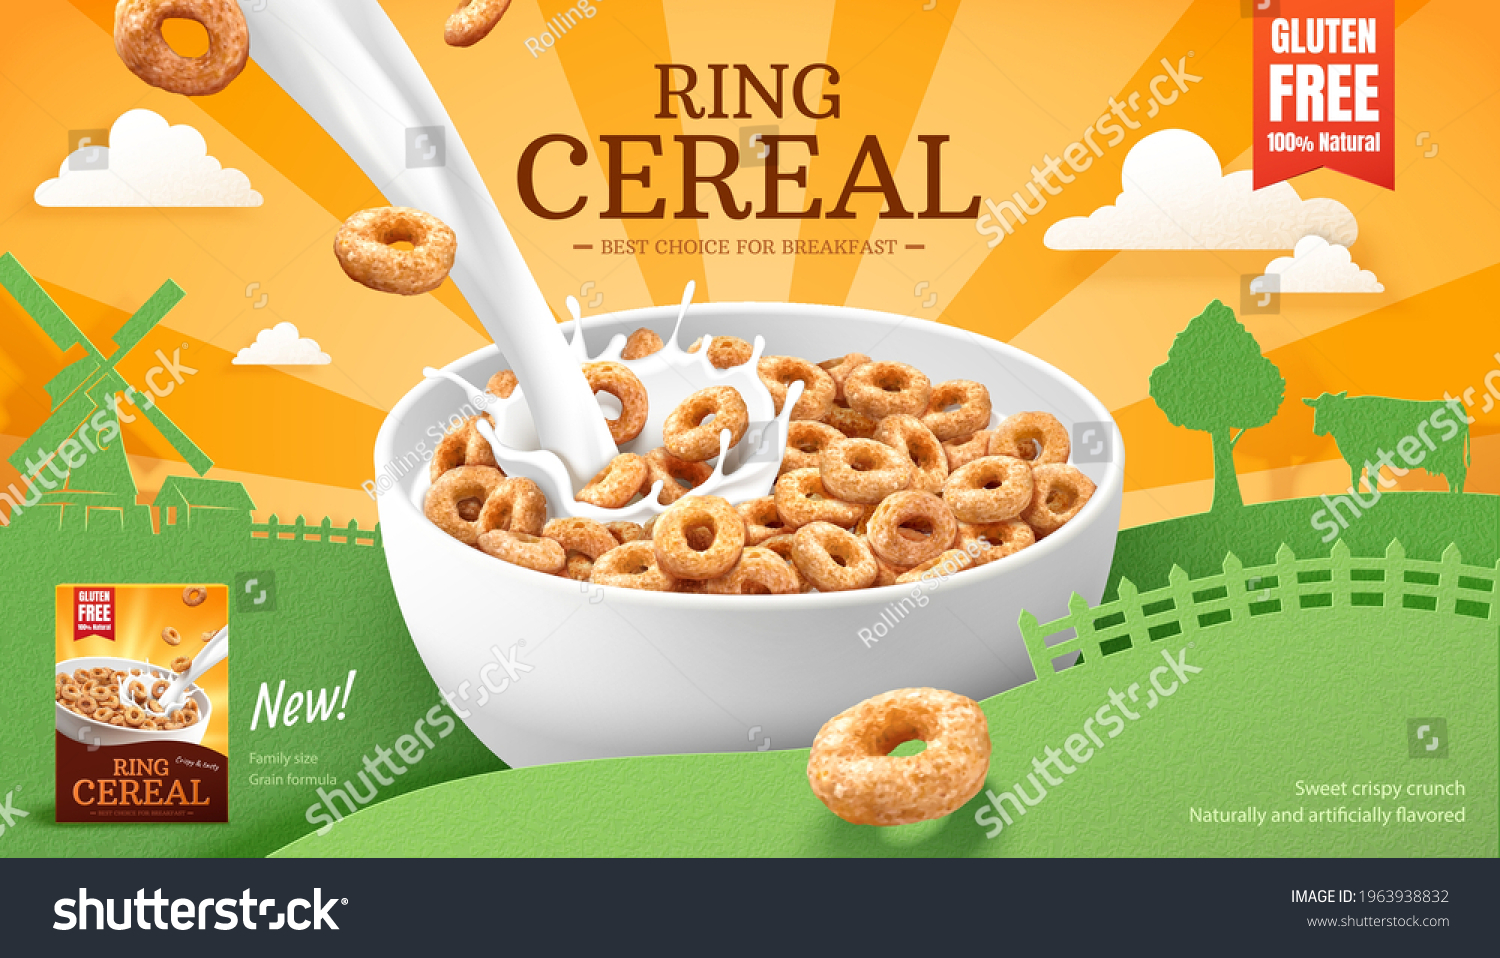 SVG of 3d ring cereals or cheerios ad template. A bowl of cereals with pouring milk splashes. Paper cut farm landscape silhouette background. Concept of healthy breakfast. svg